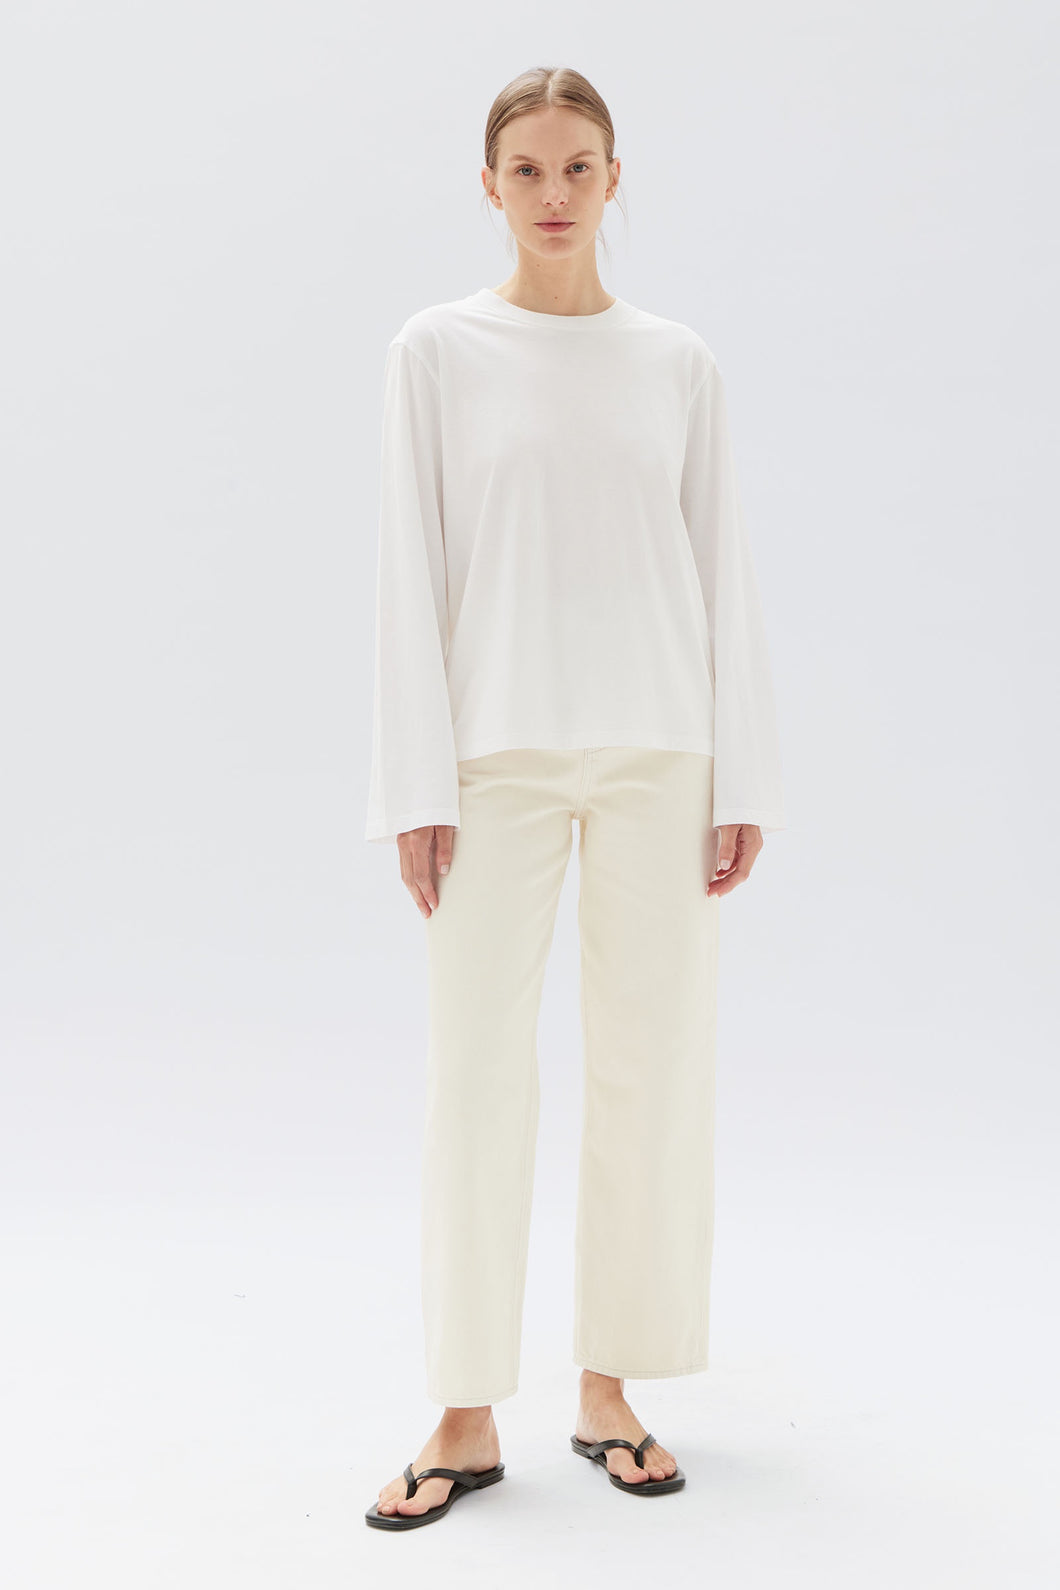 Mimi Long Sleeve Top - White-ASSEMBLY LABEL-P&K The General Store